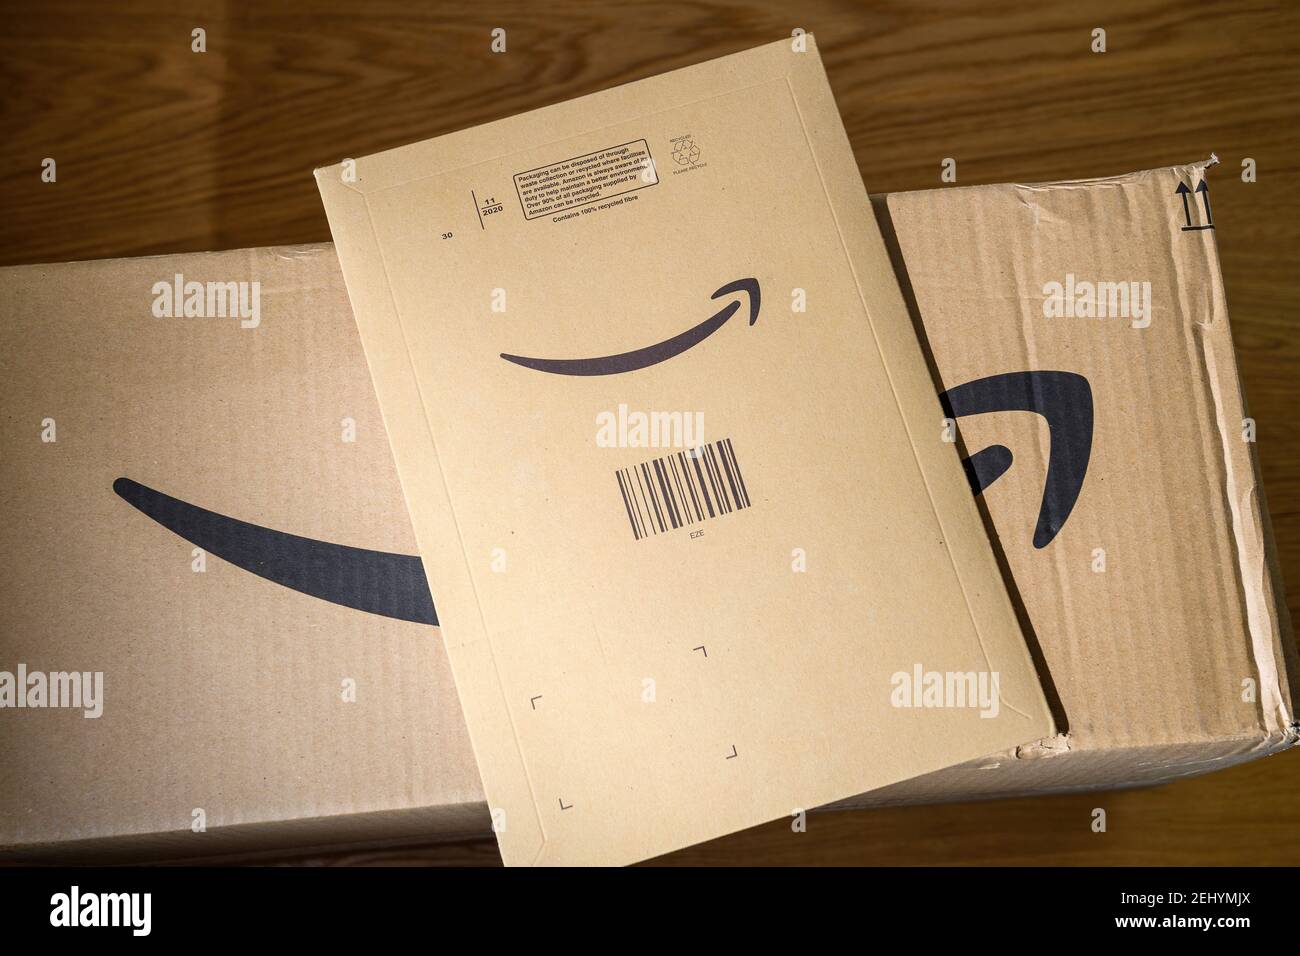 Paris, France - FEb 6, 2021: Two Amazon Prime cardboard parcels one large box and one envelope with multiple objects inside. Amazon.com was founded by Jeff Bezos Stock Photo